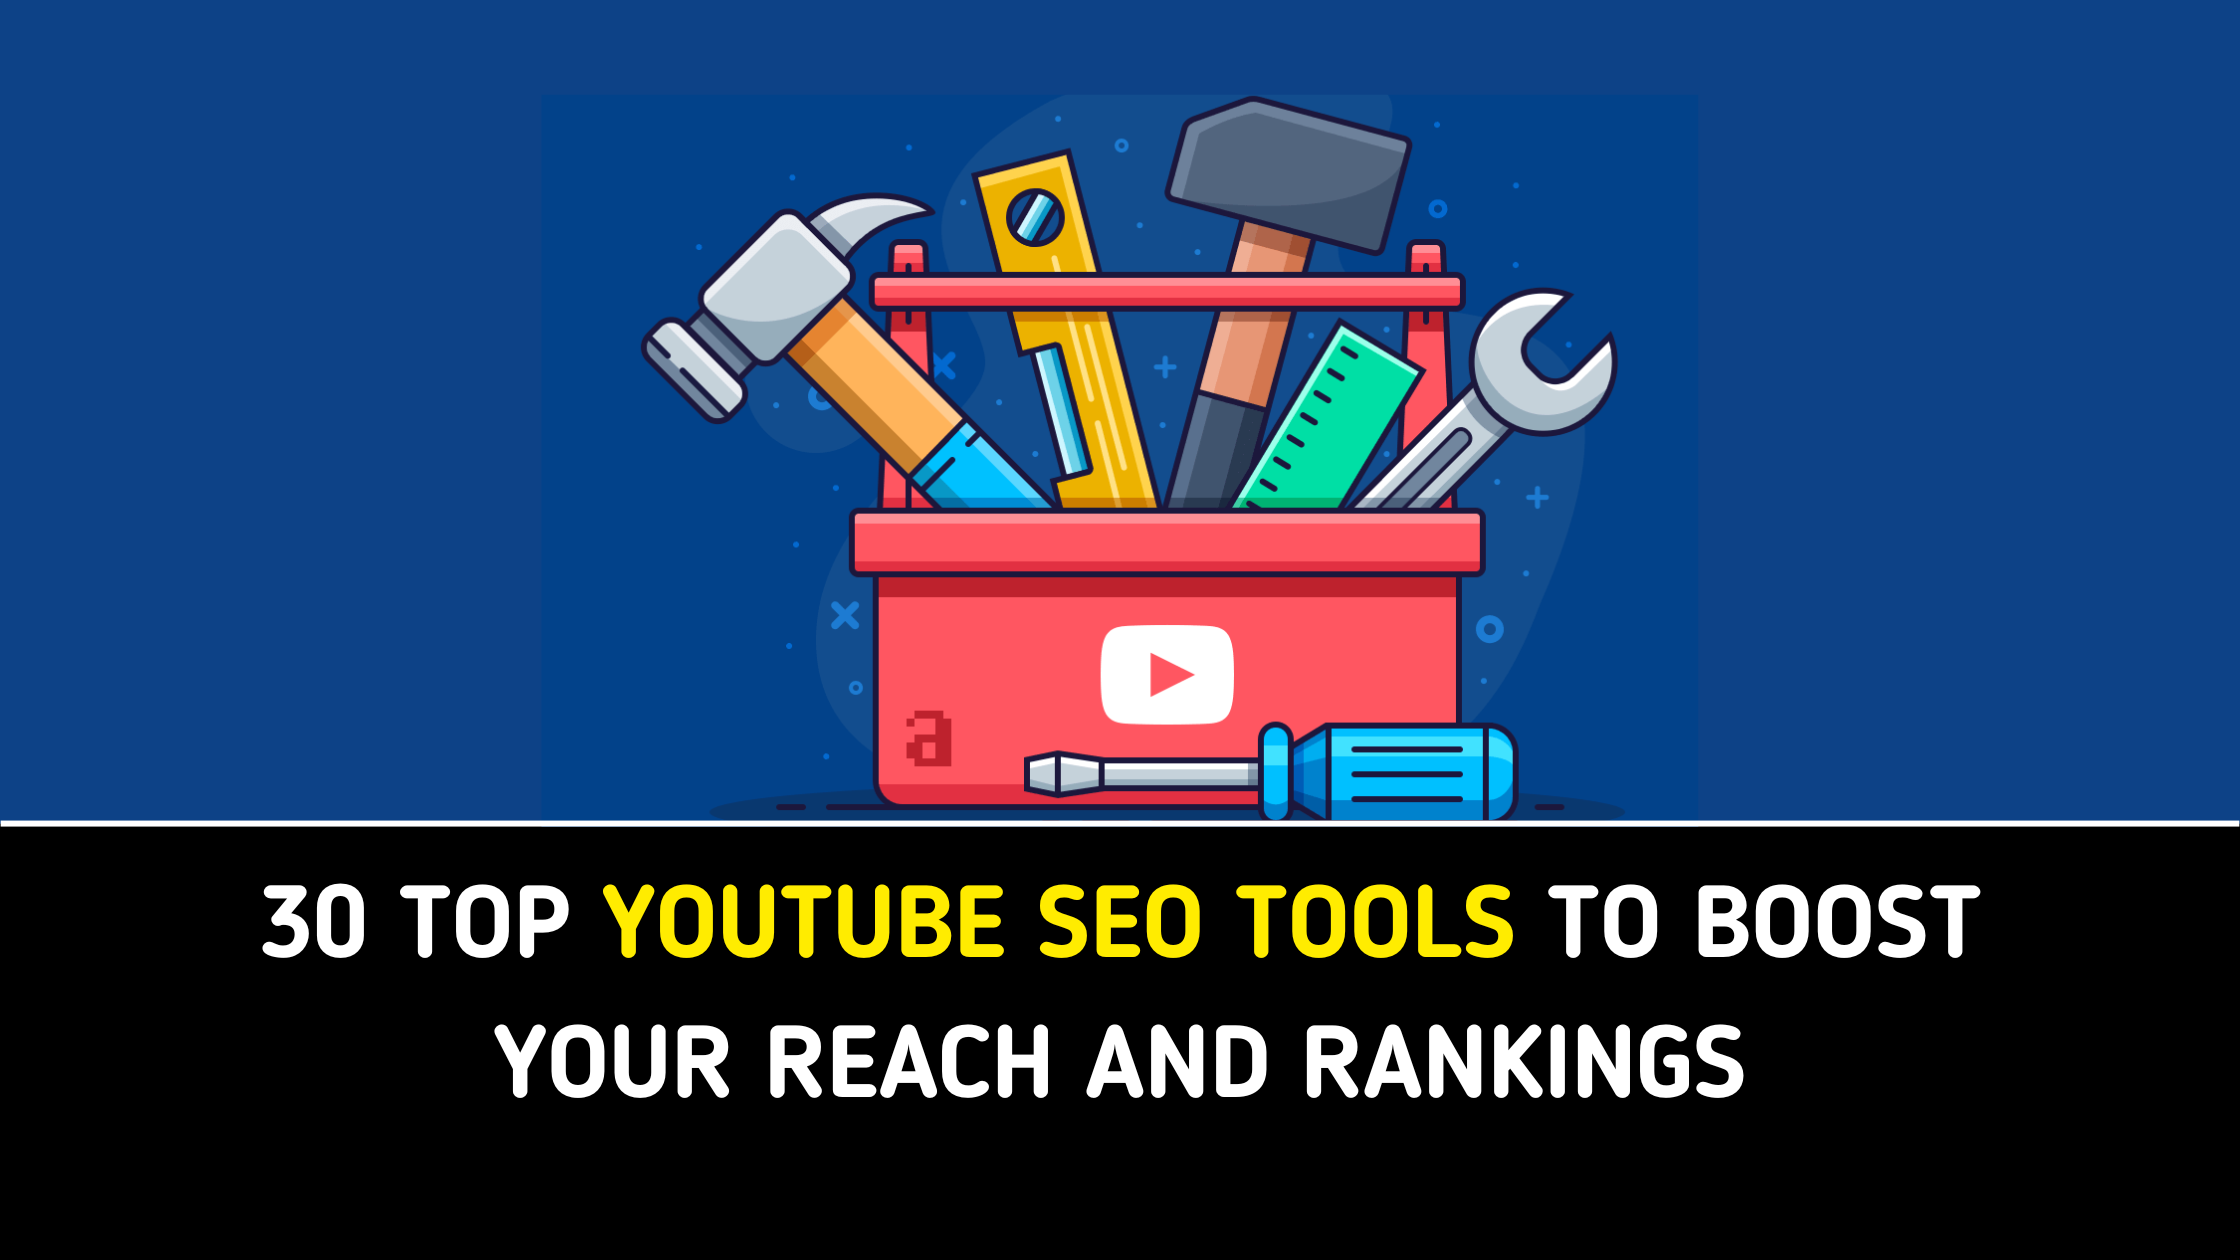 30 Top YouTube SEO Tools to Boost Your Reach and Rankings.png